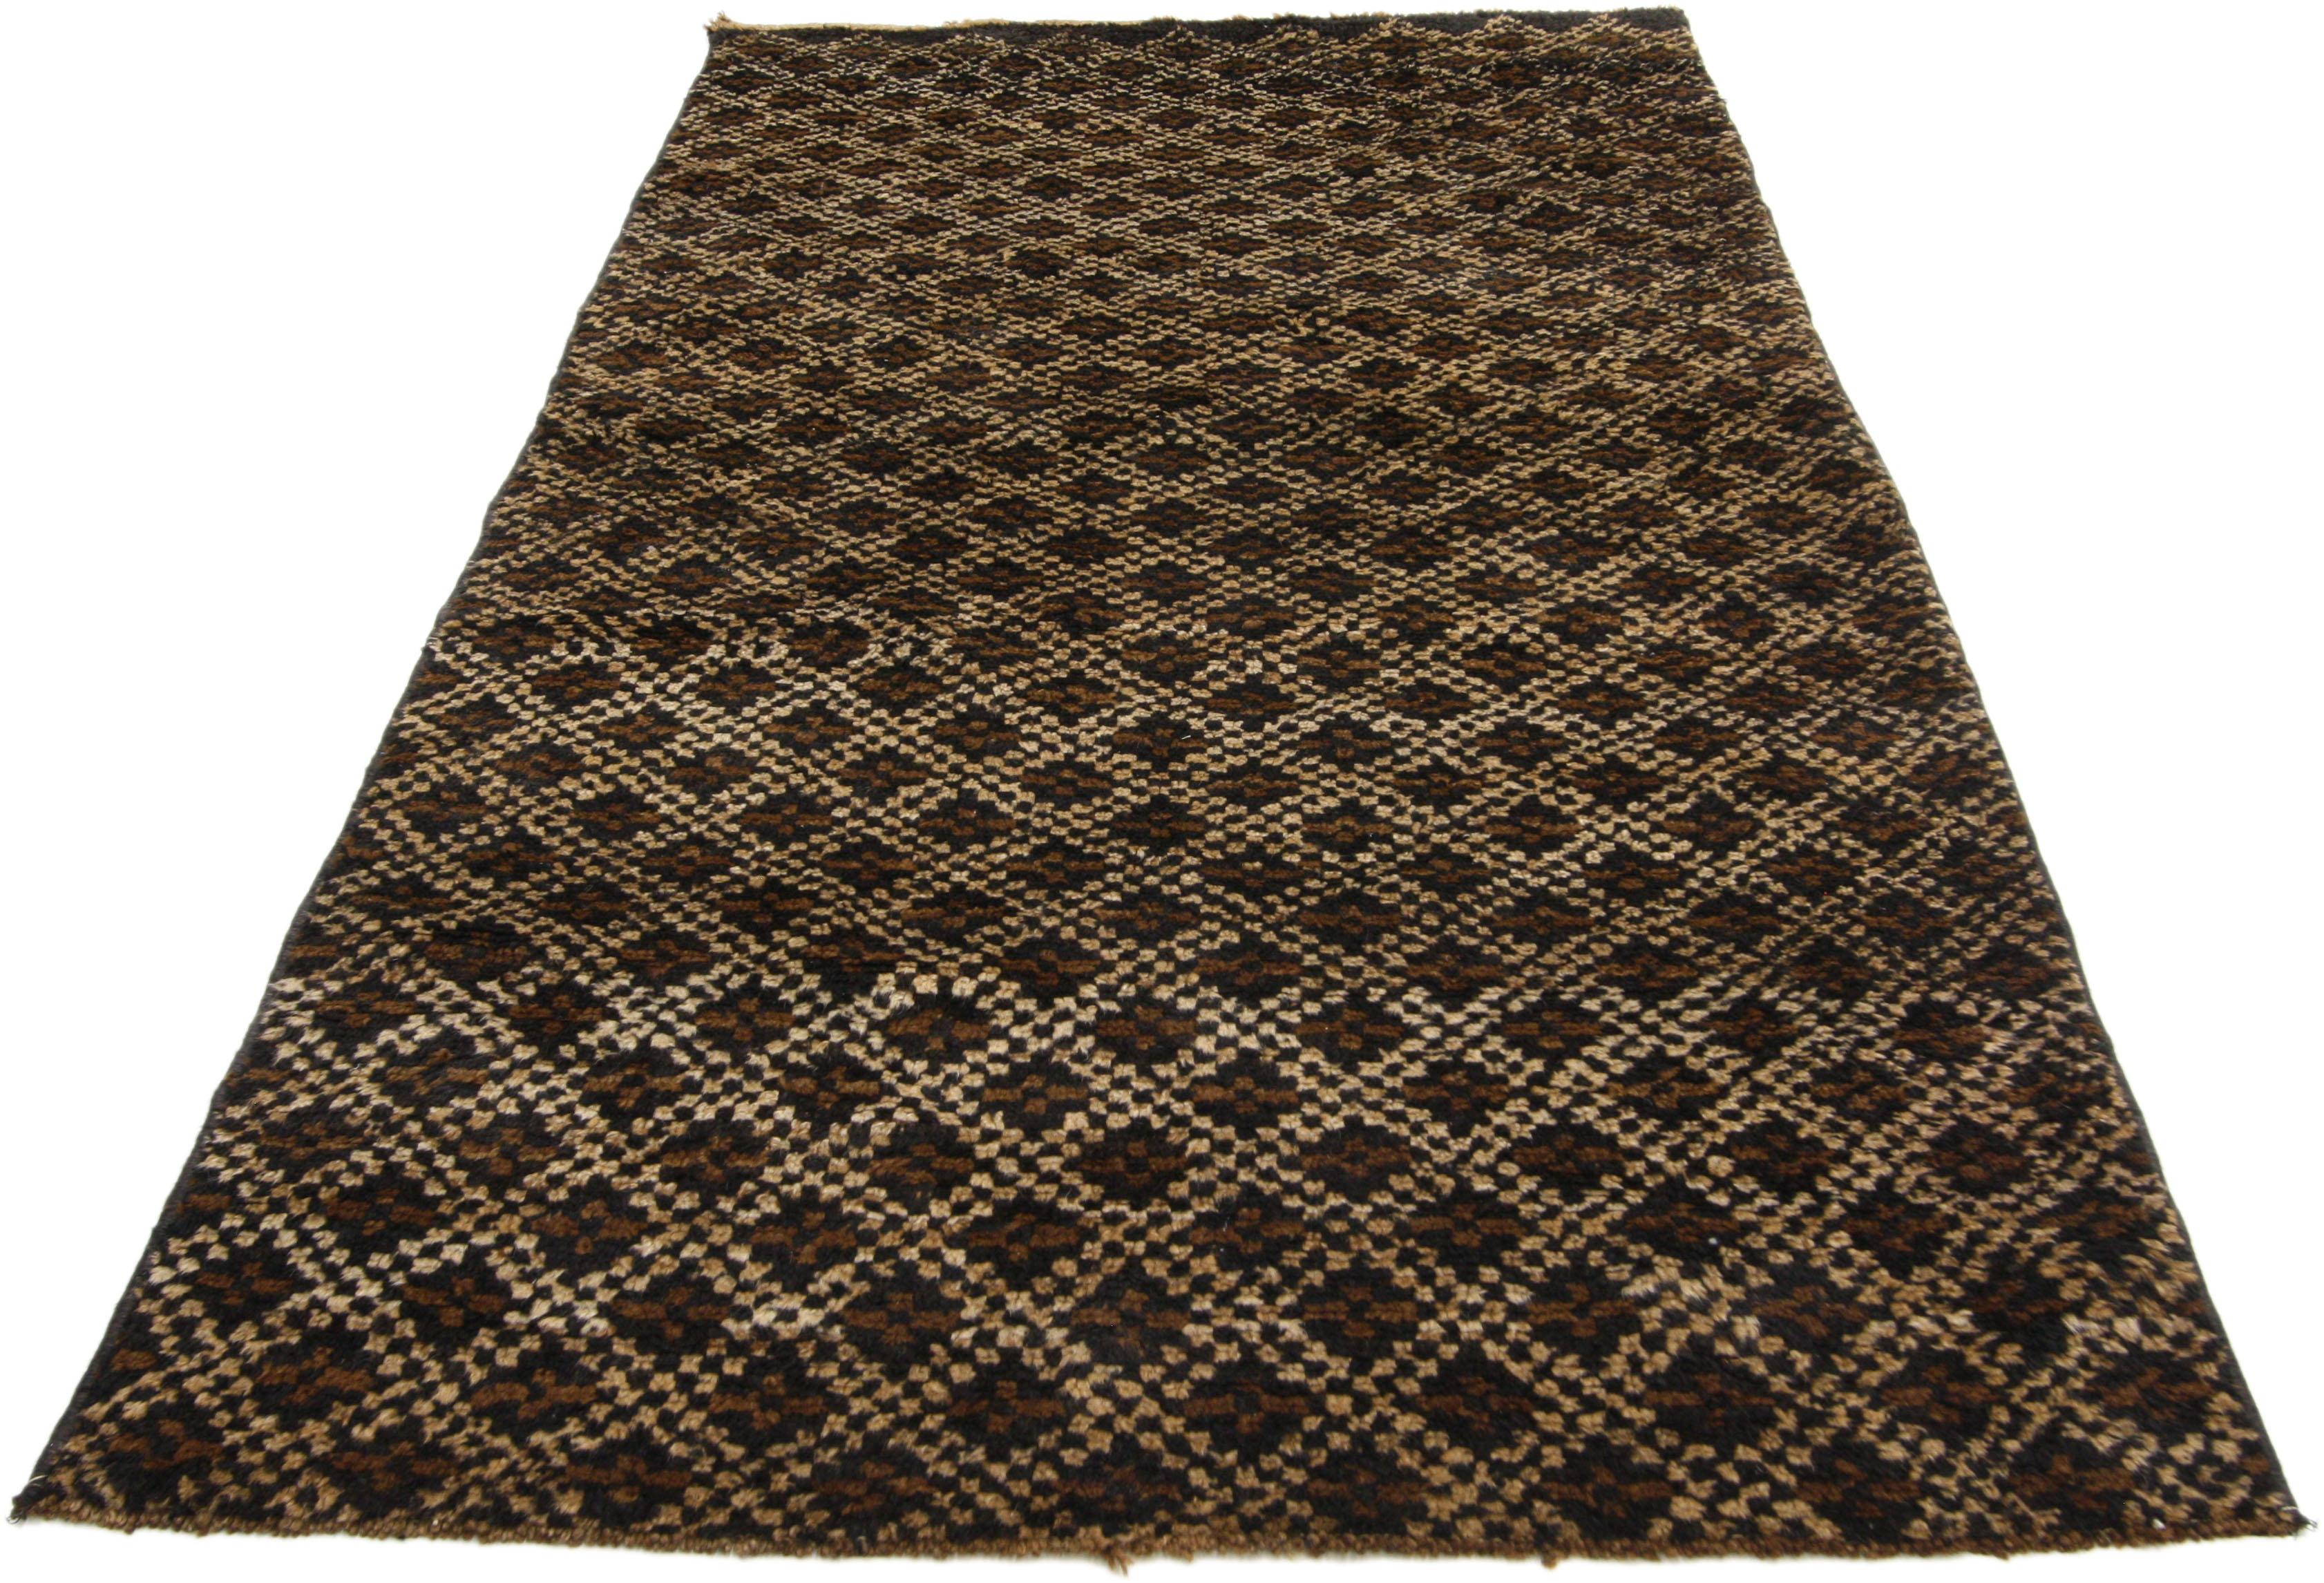 Hand-Knotted Vintage Turkish Tulu Accent Rug with Mid-Century Modern Style, Small Shag Runner